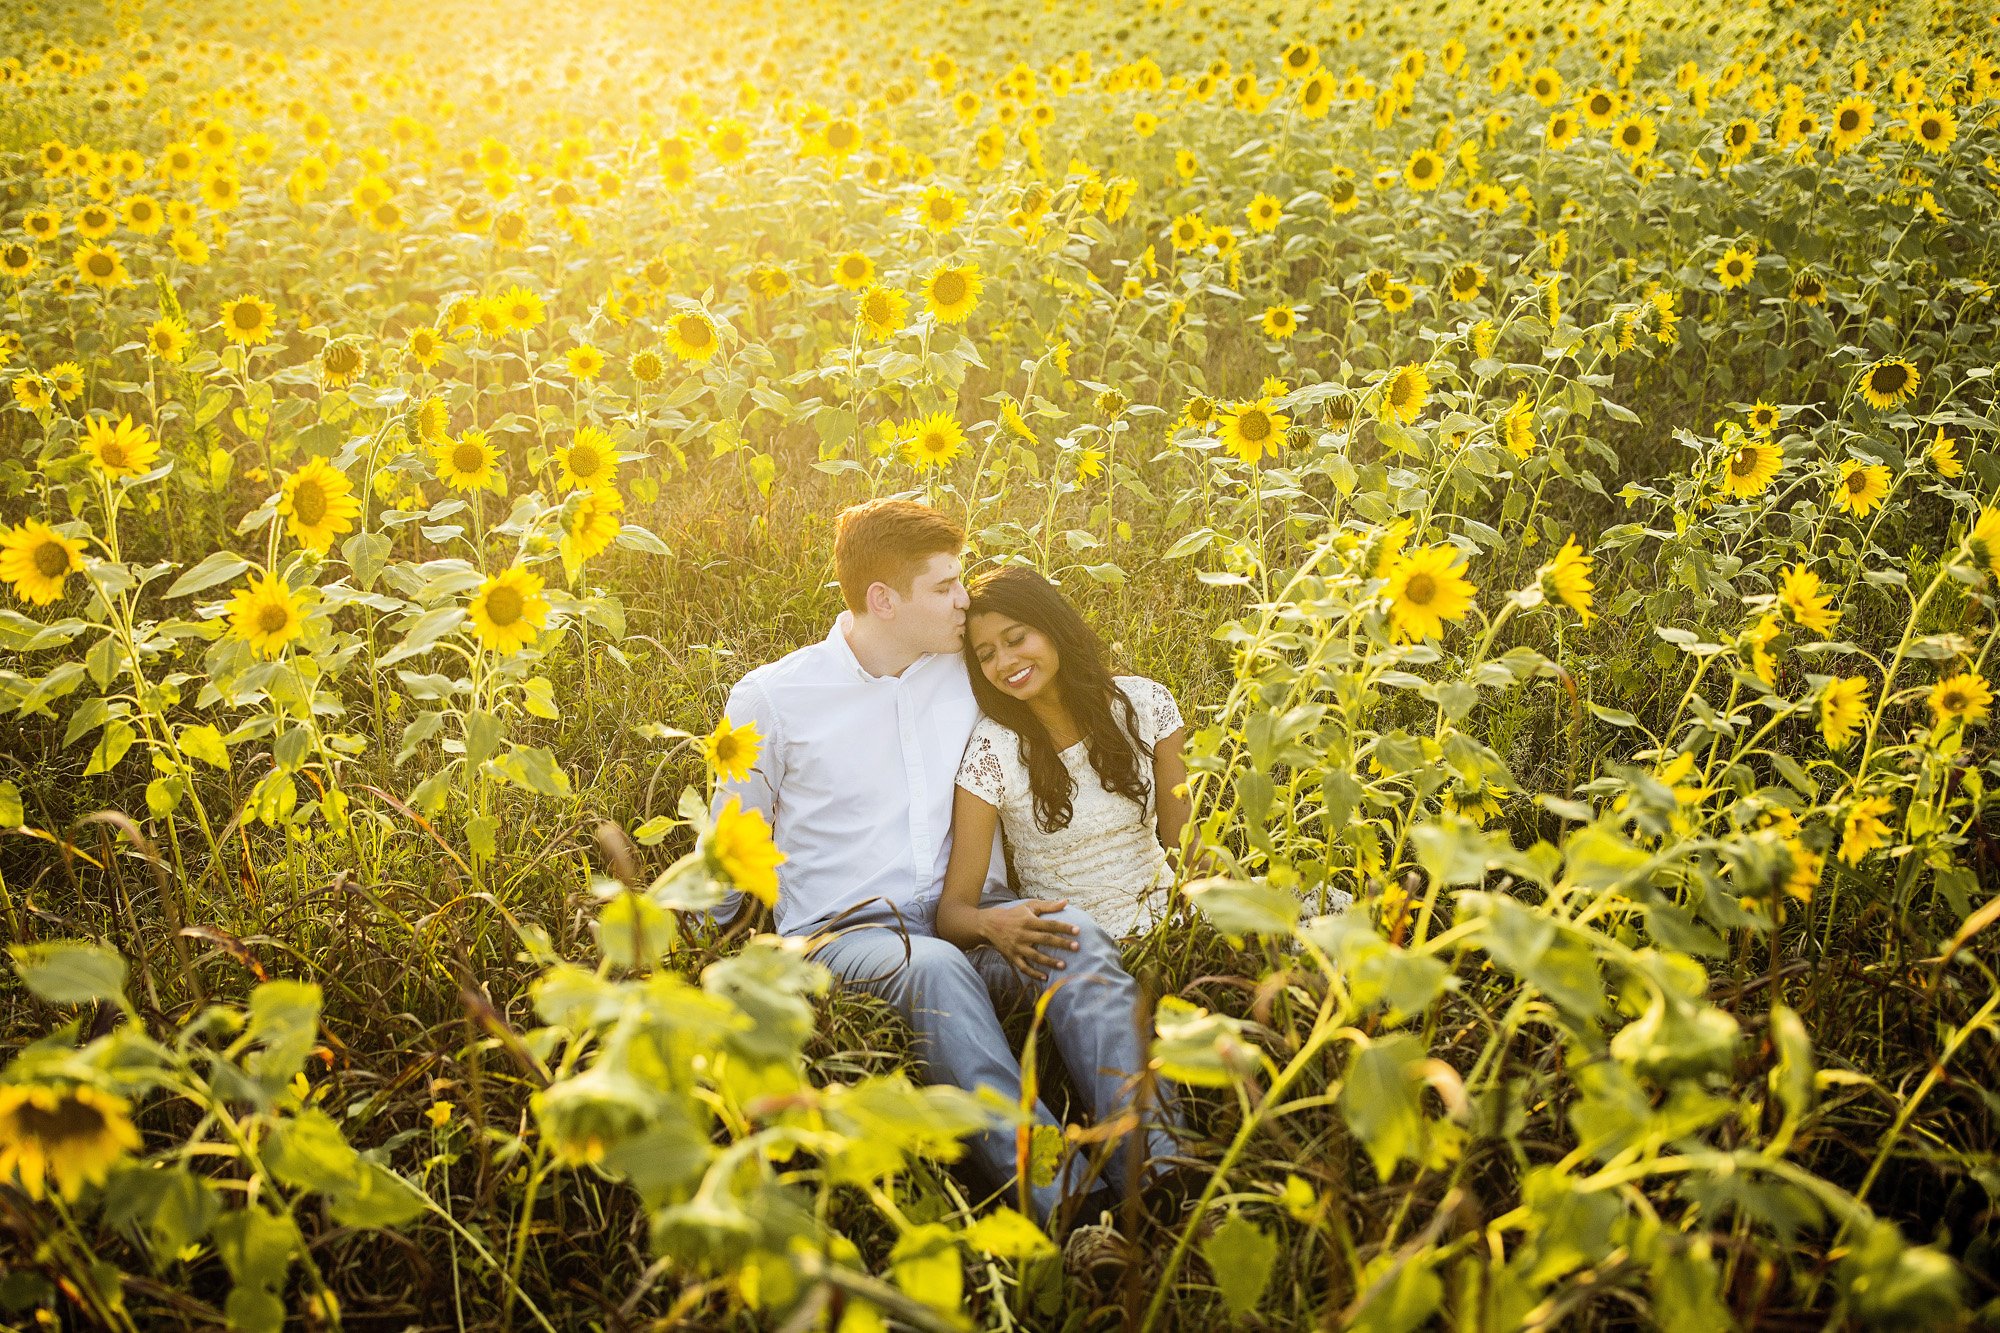 Seriously_Sabrina_Photography_Lexington_Midway_Kentucky_Engagement_Merefield_Sunflowers_Naz_and_Drew8.jpg